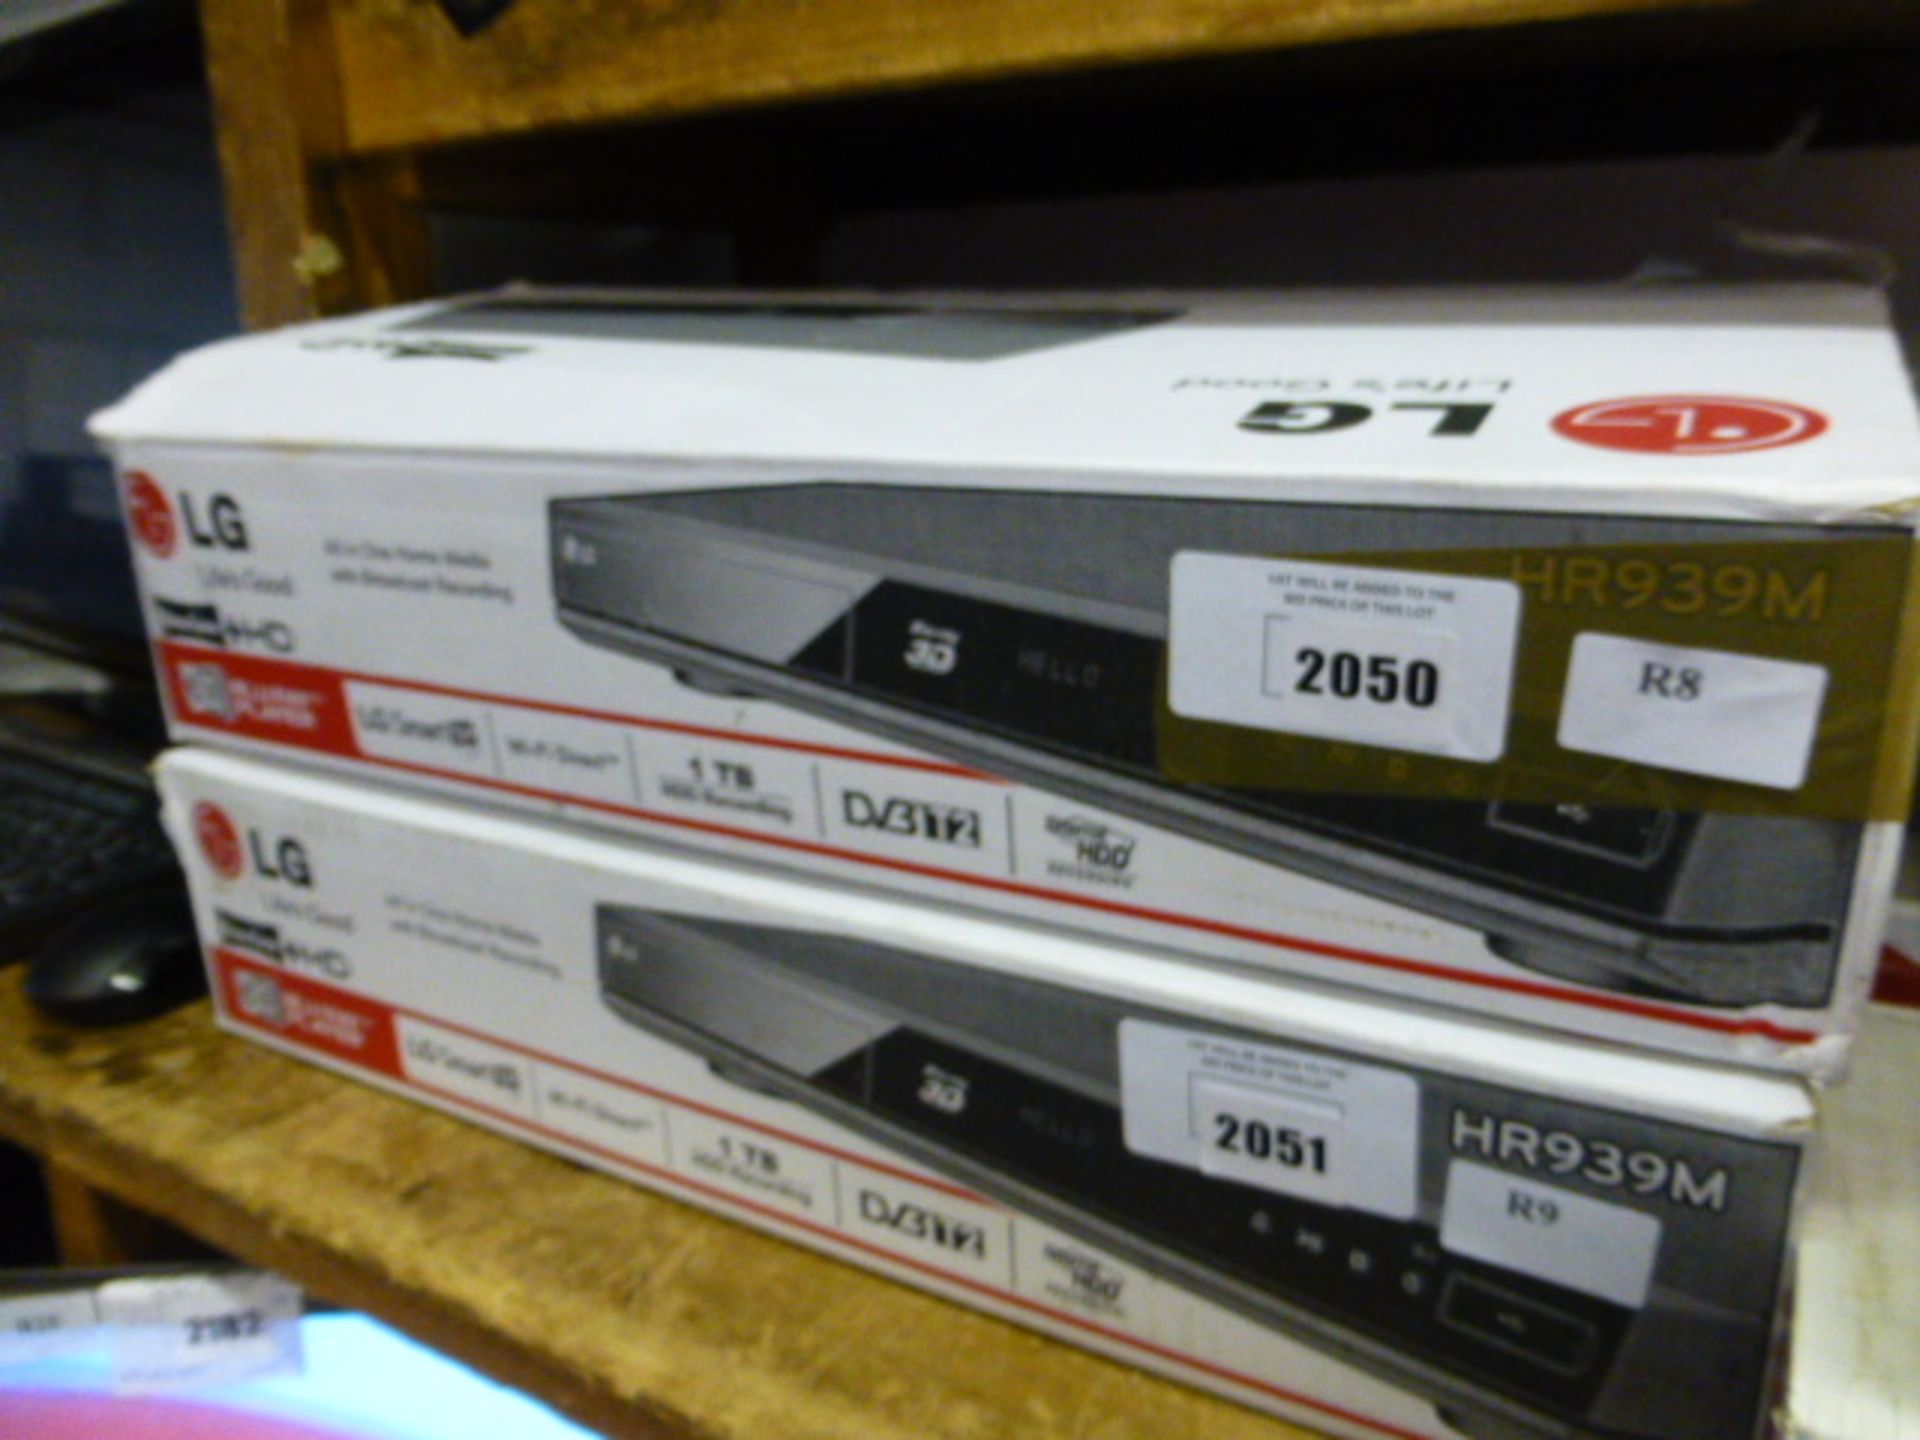 R8 LG HR939M 1TB HDD recorder and 3D Blu-ray player in box